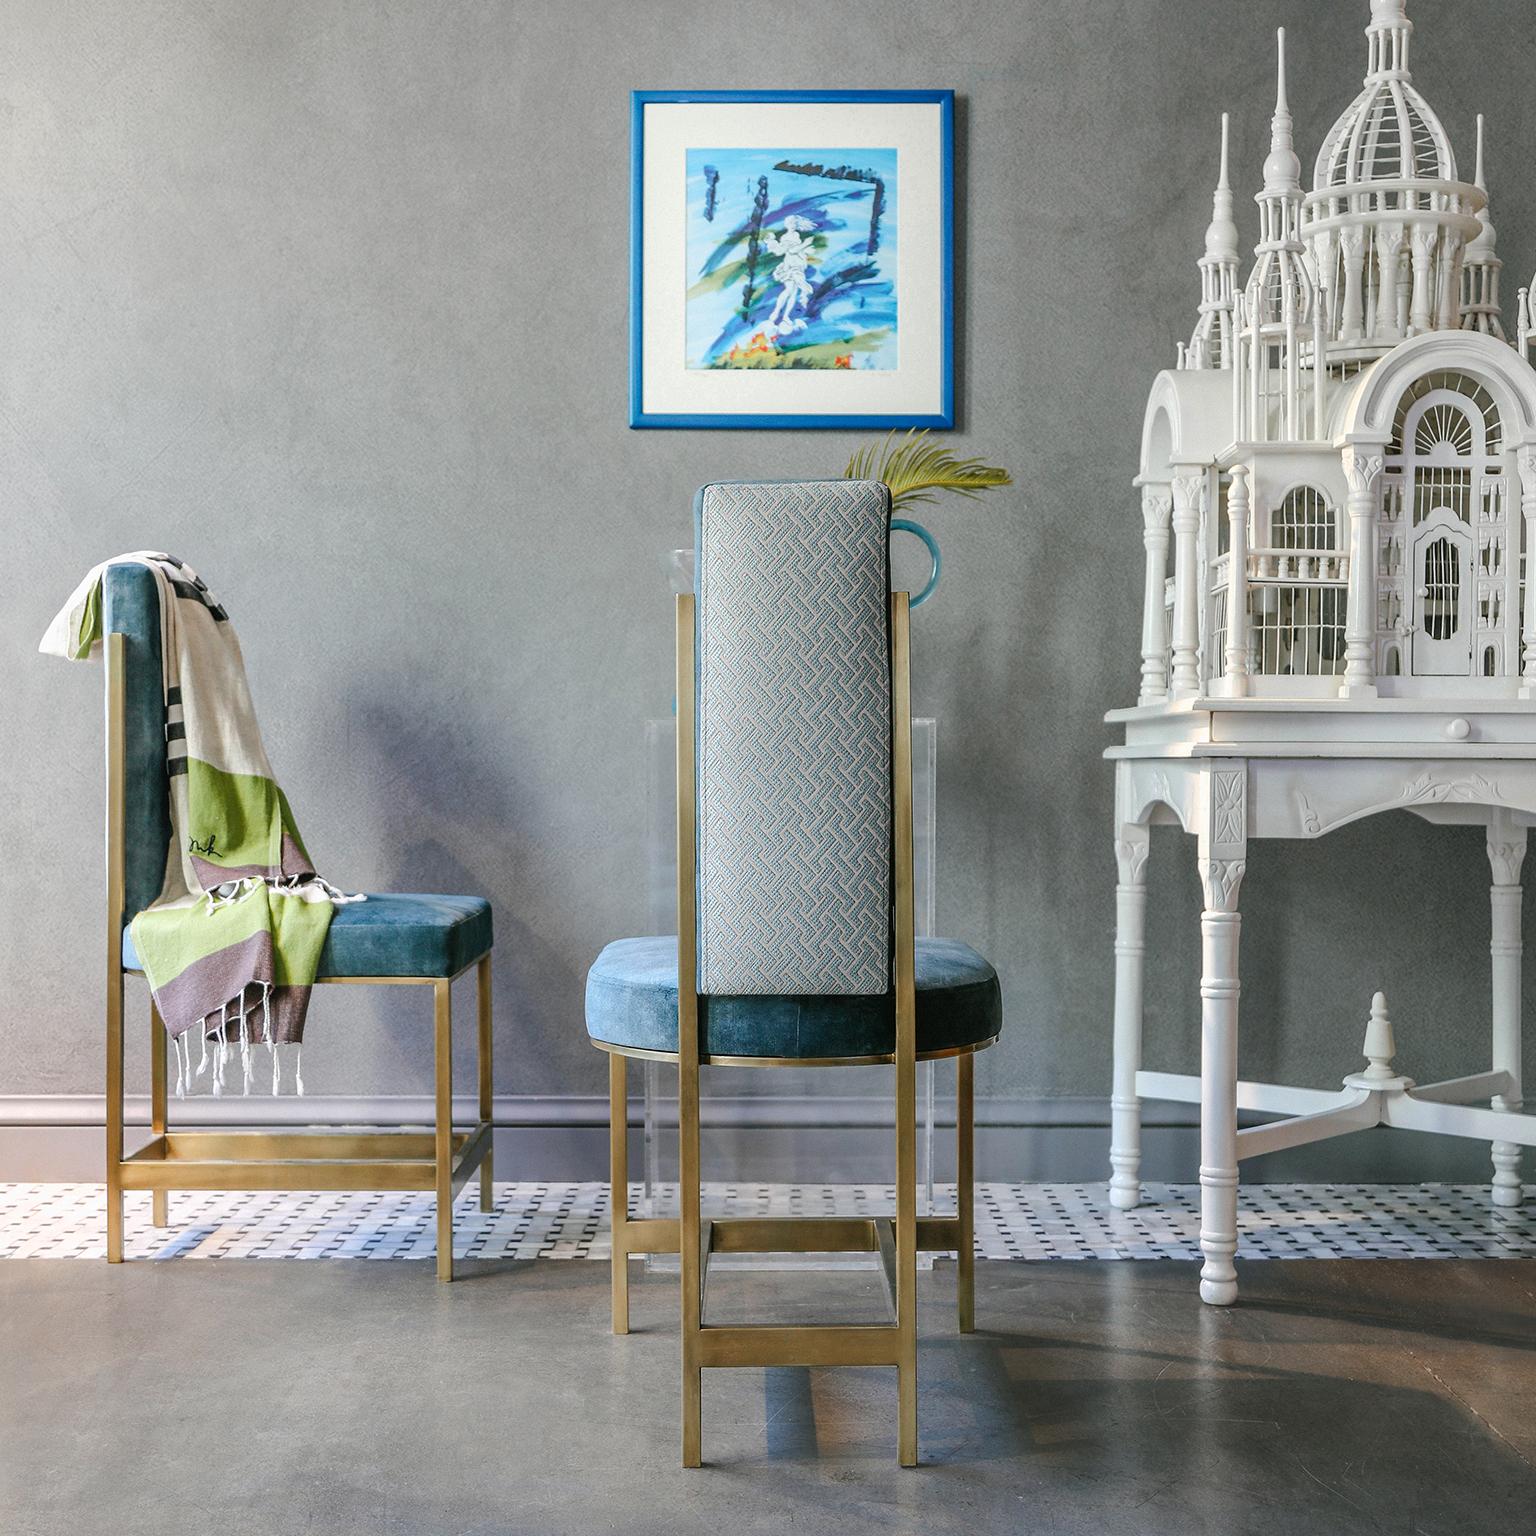 The recalled blue chair brings out your resonance for antiquity with its fine workmanship and aesthetic form combined with practical comfort.

Inspired by ancient cities, the RECALLED series brings the fascinating aesthetics of the past to daily